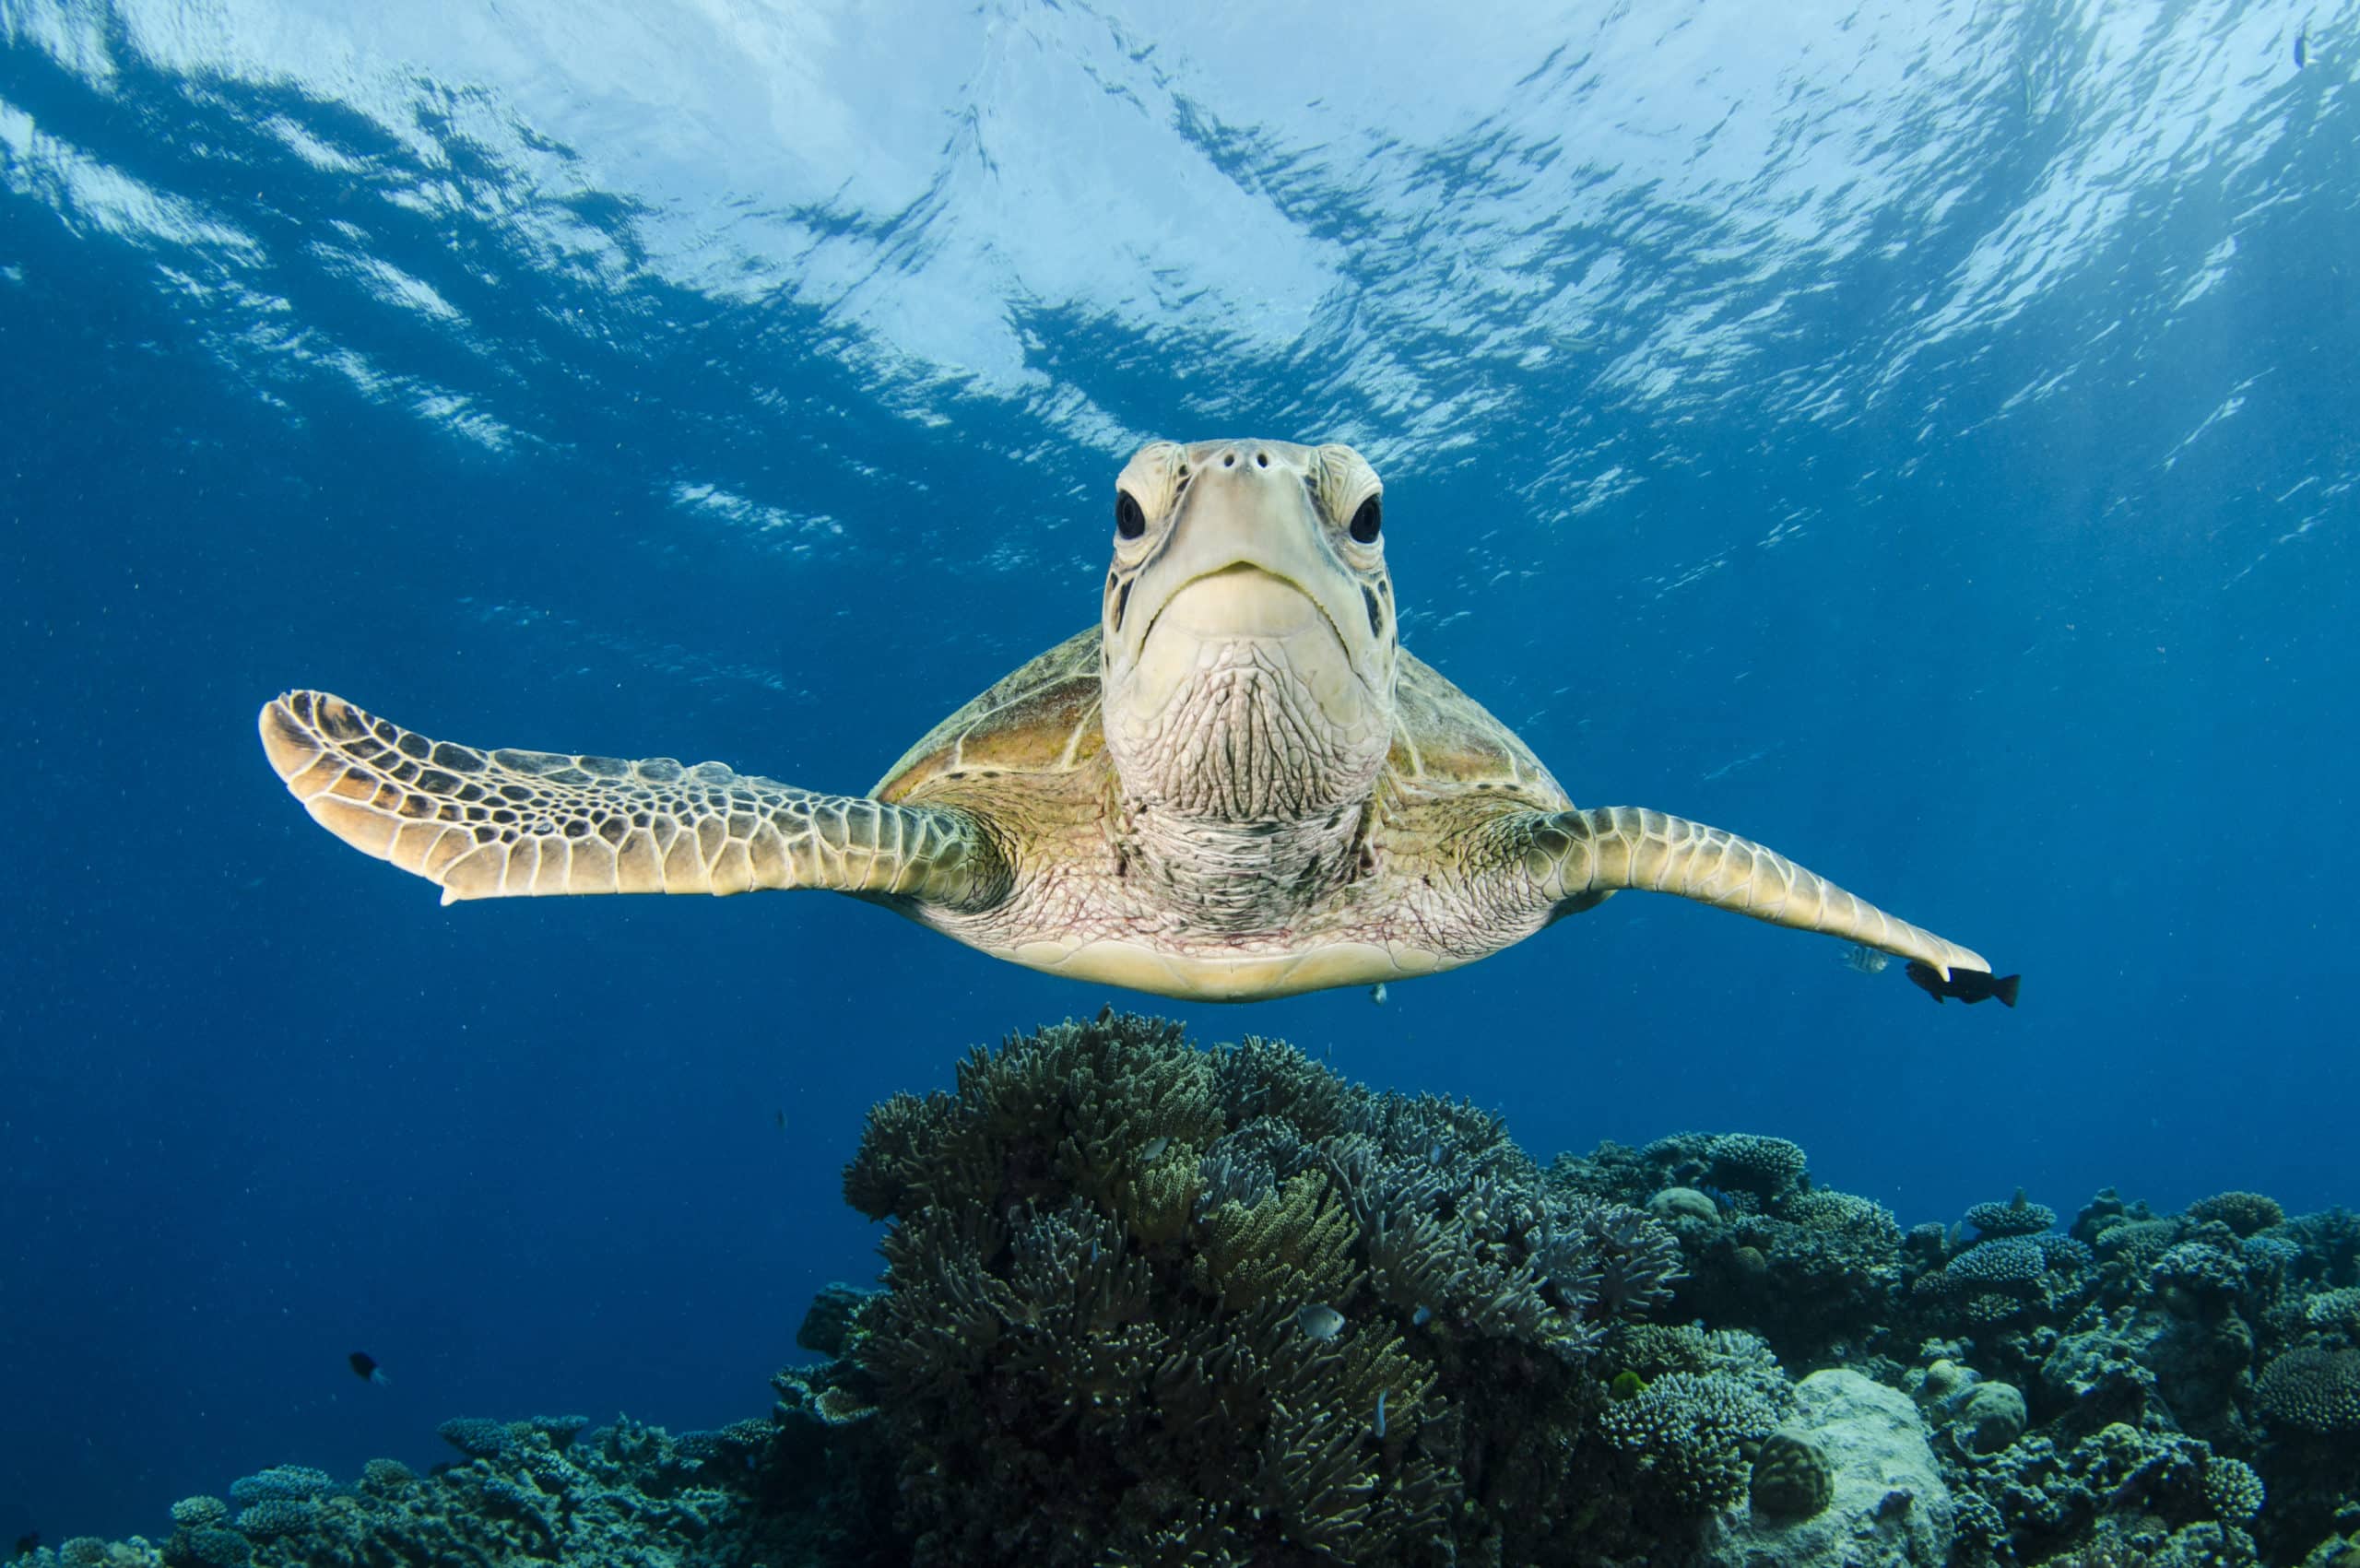 Green Sea Turtle swims along the Great Barrier Reef looking for food.